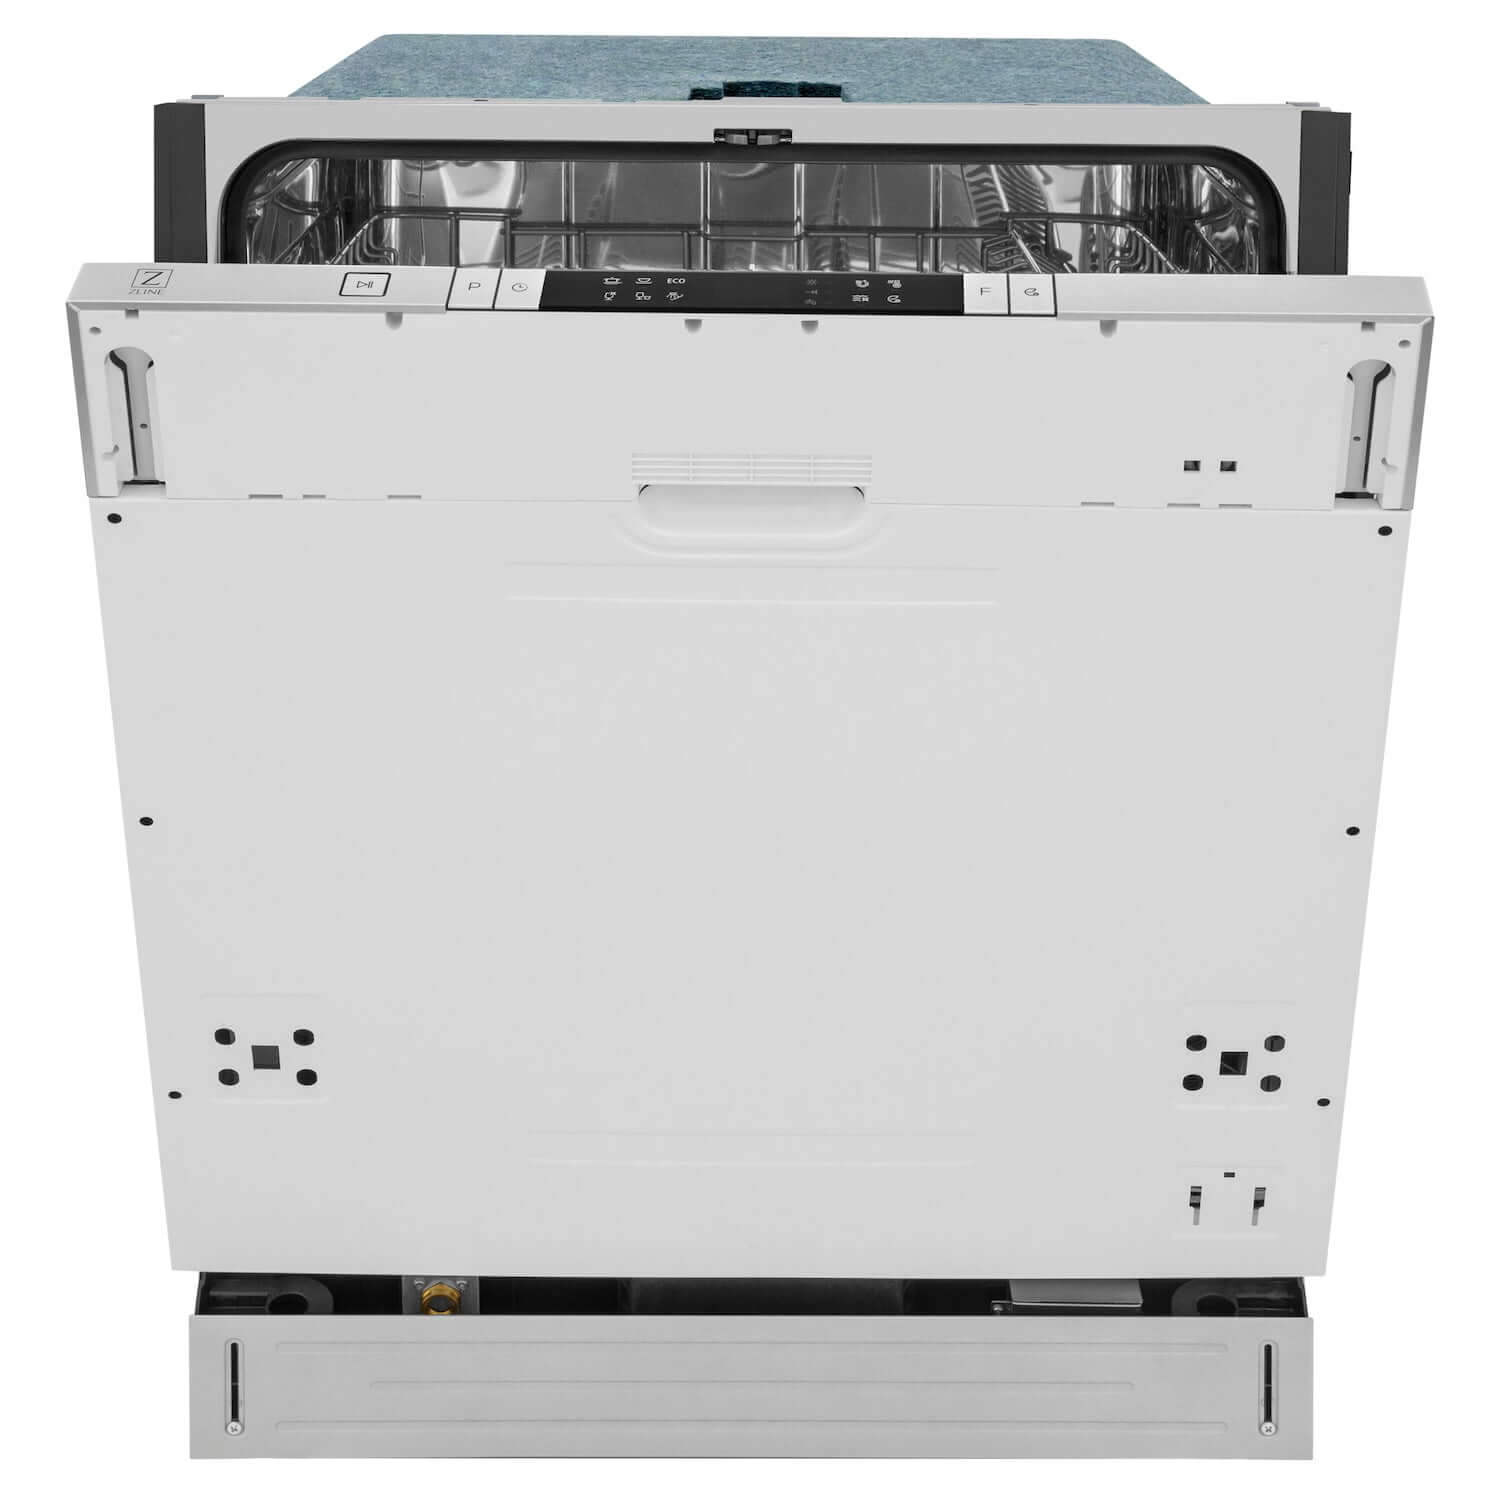 ZLINE 24 in. Panel Ready Top Control Built-In Dishwasher with Stainless Steel Tub, 52dBa (DW7713-24)